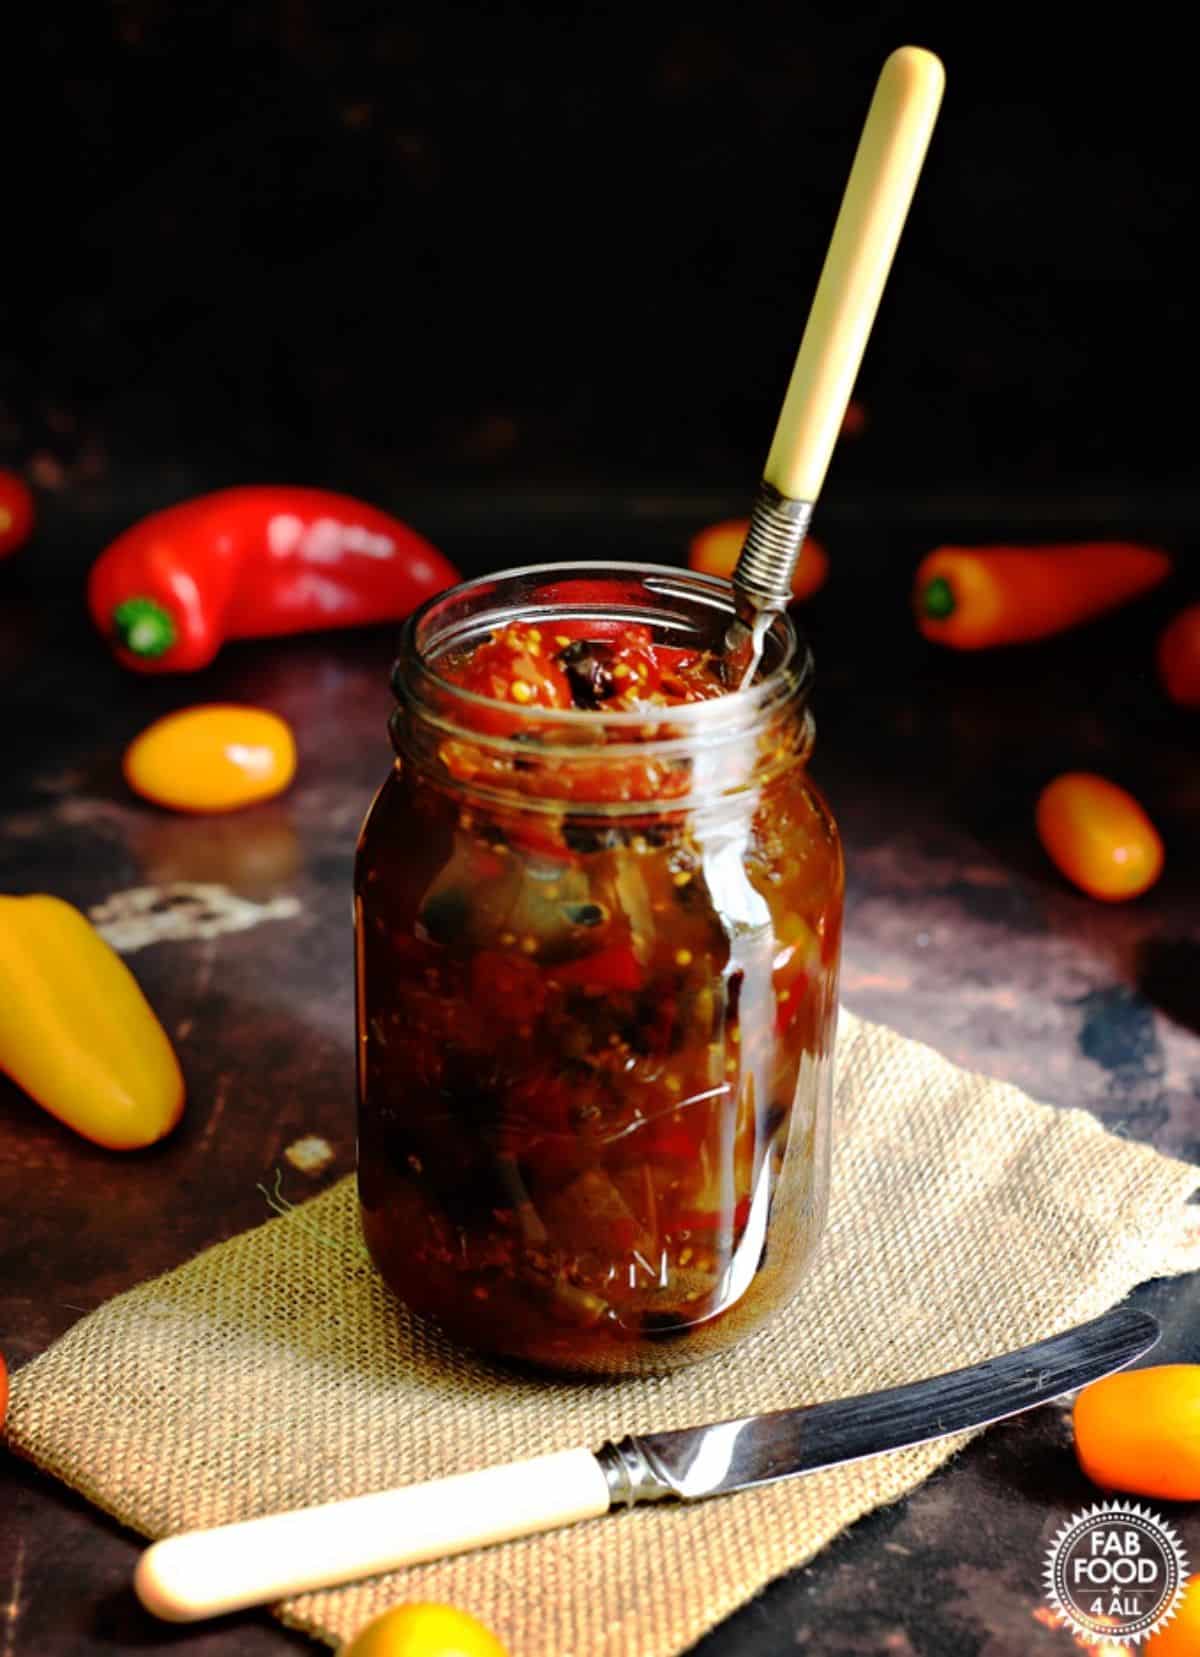 Juicy Spicy Baby Tomato and Sweet Pepper Chutney in a glass jar with a spoon.